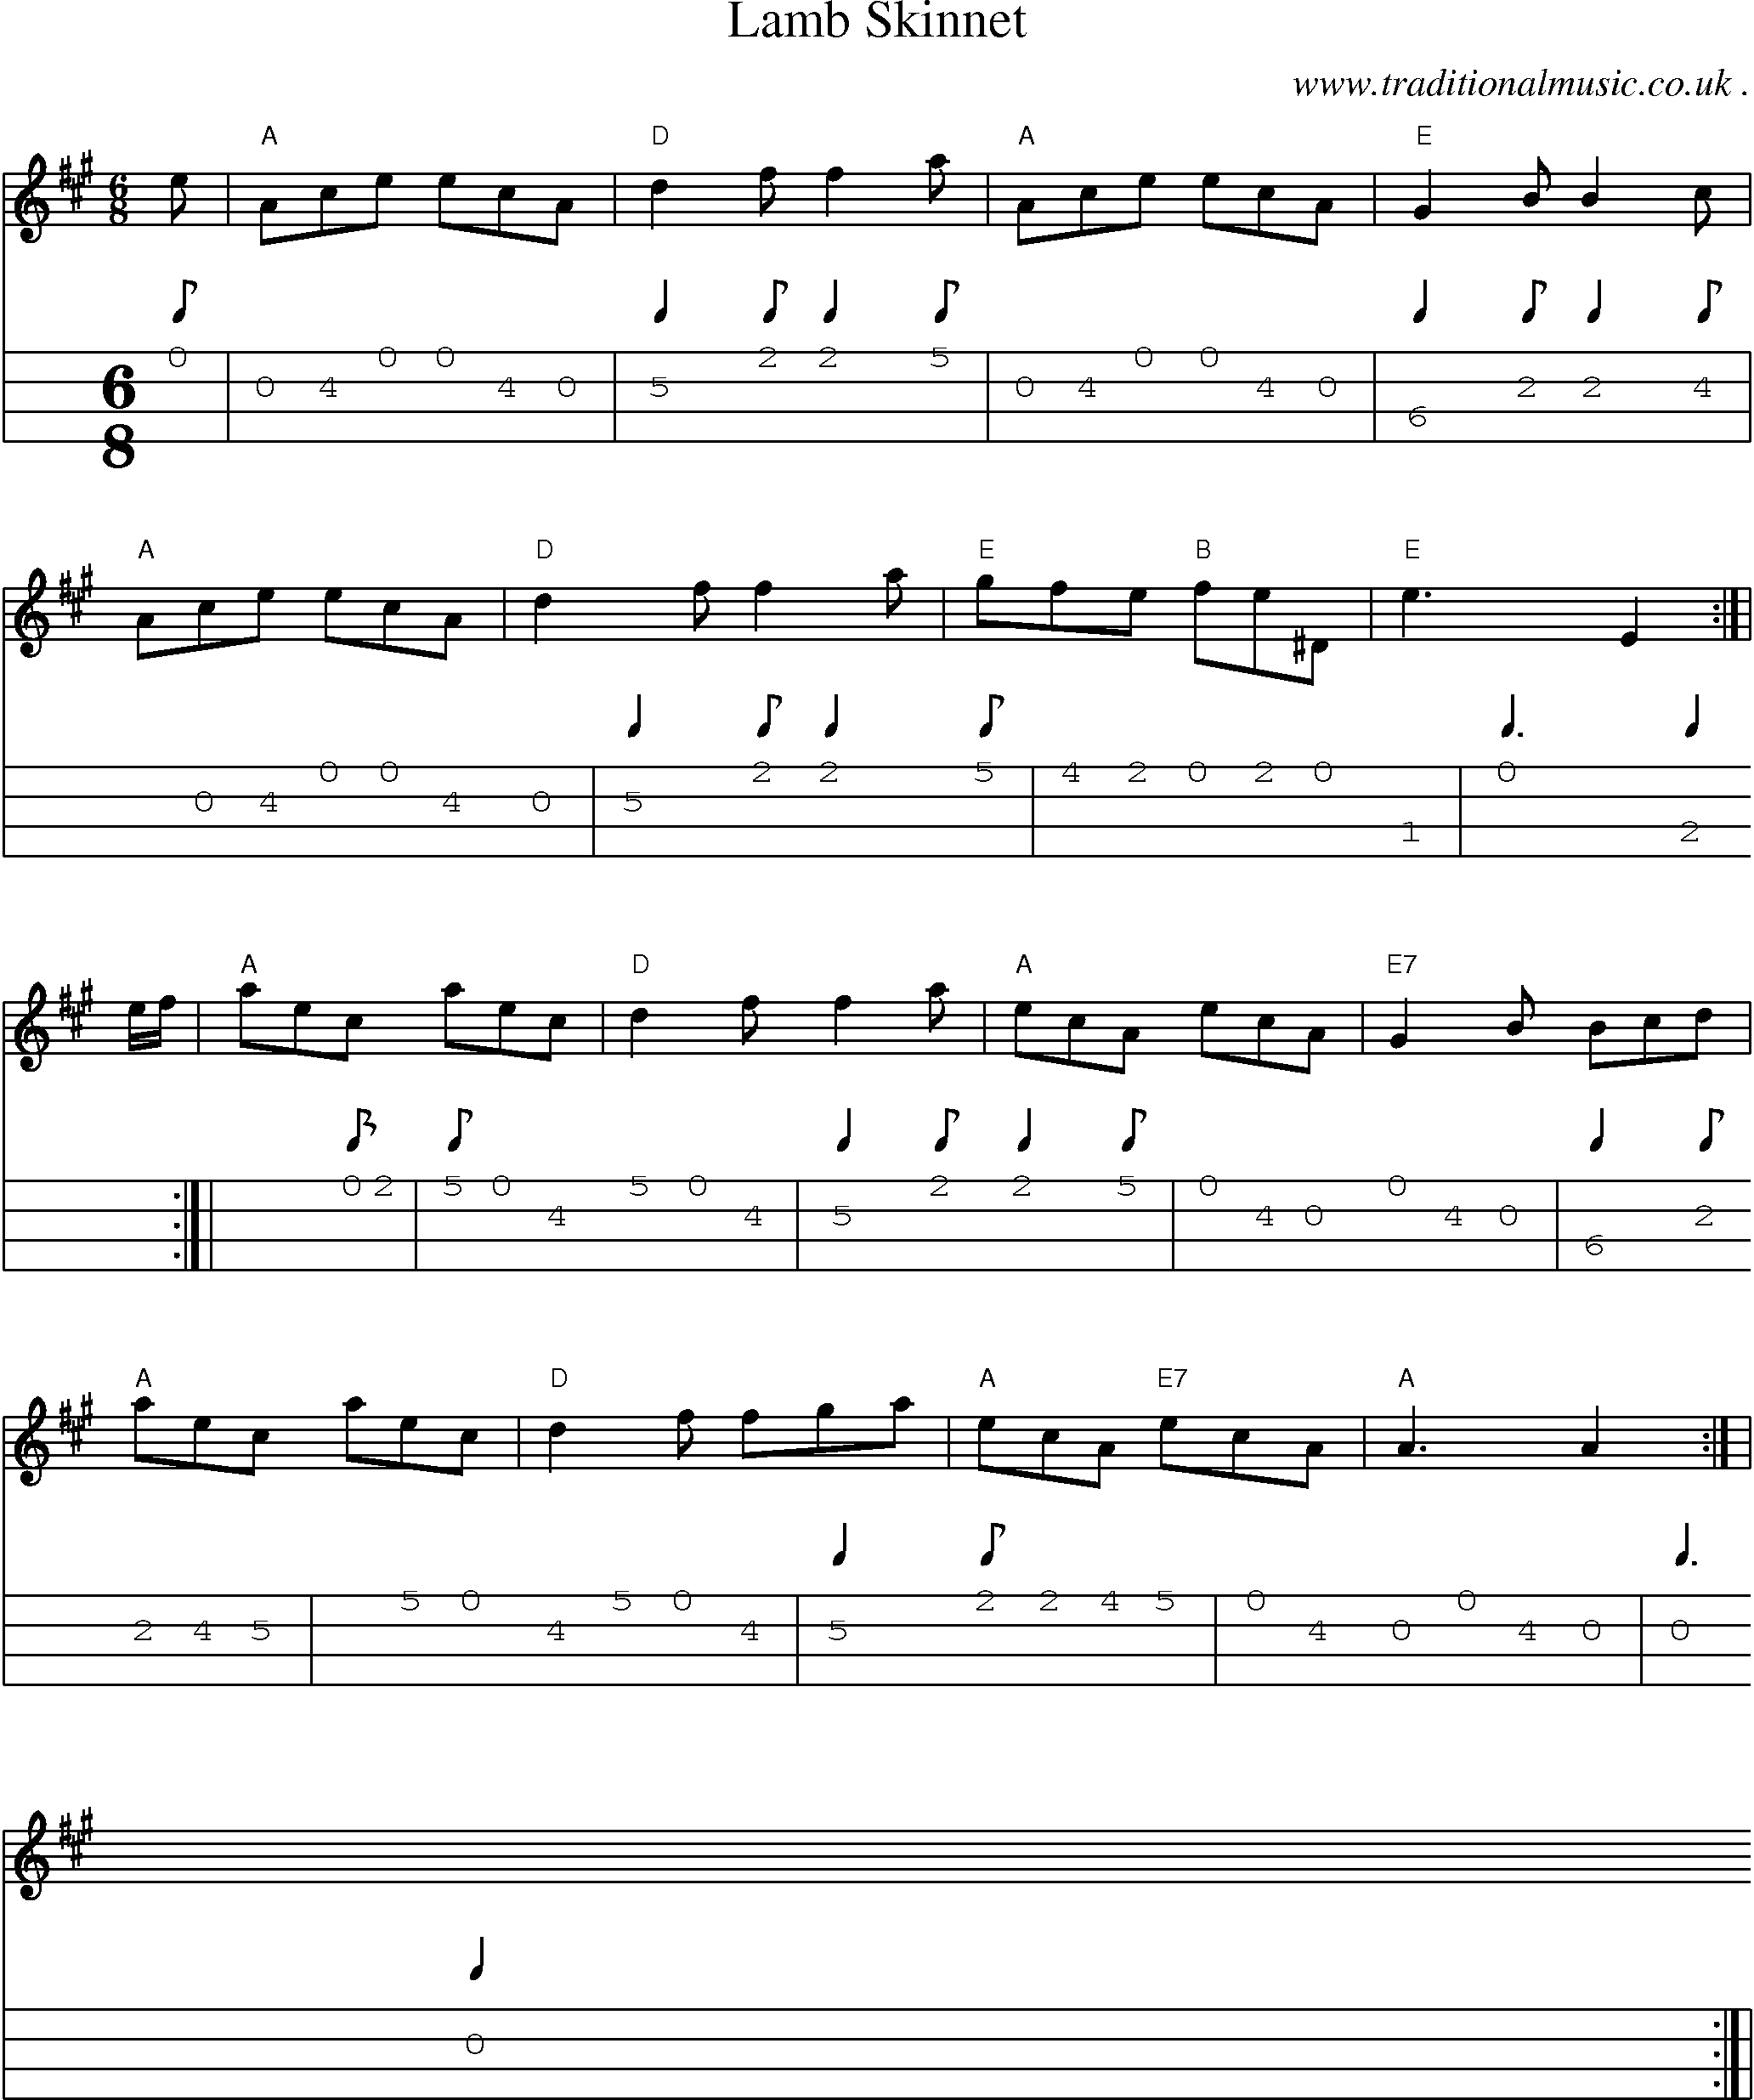 Sheet-music  score, Chords and Mandolin Tabs for Lamb Skinnet